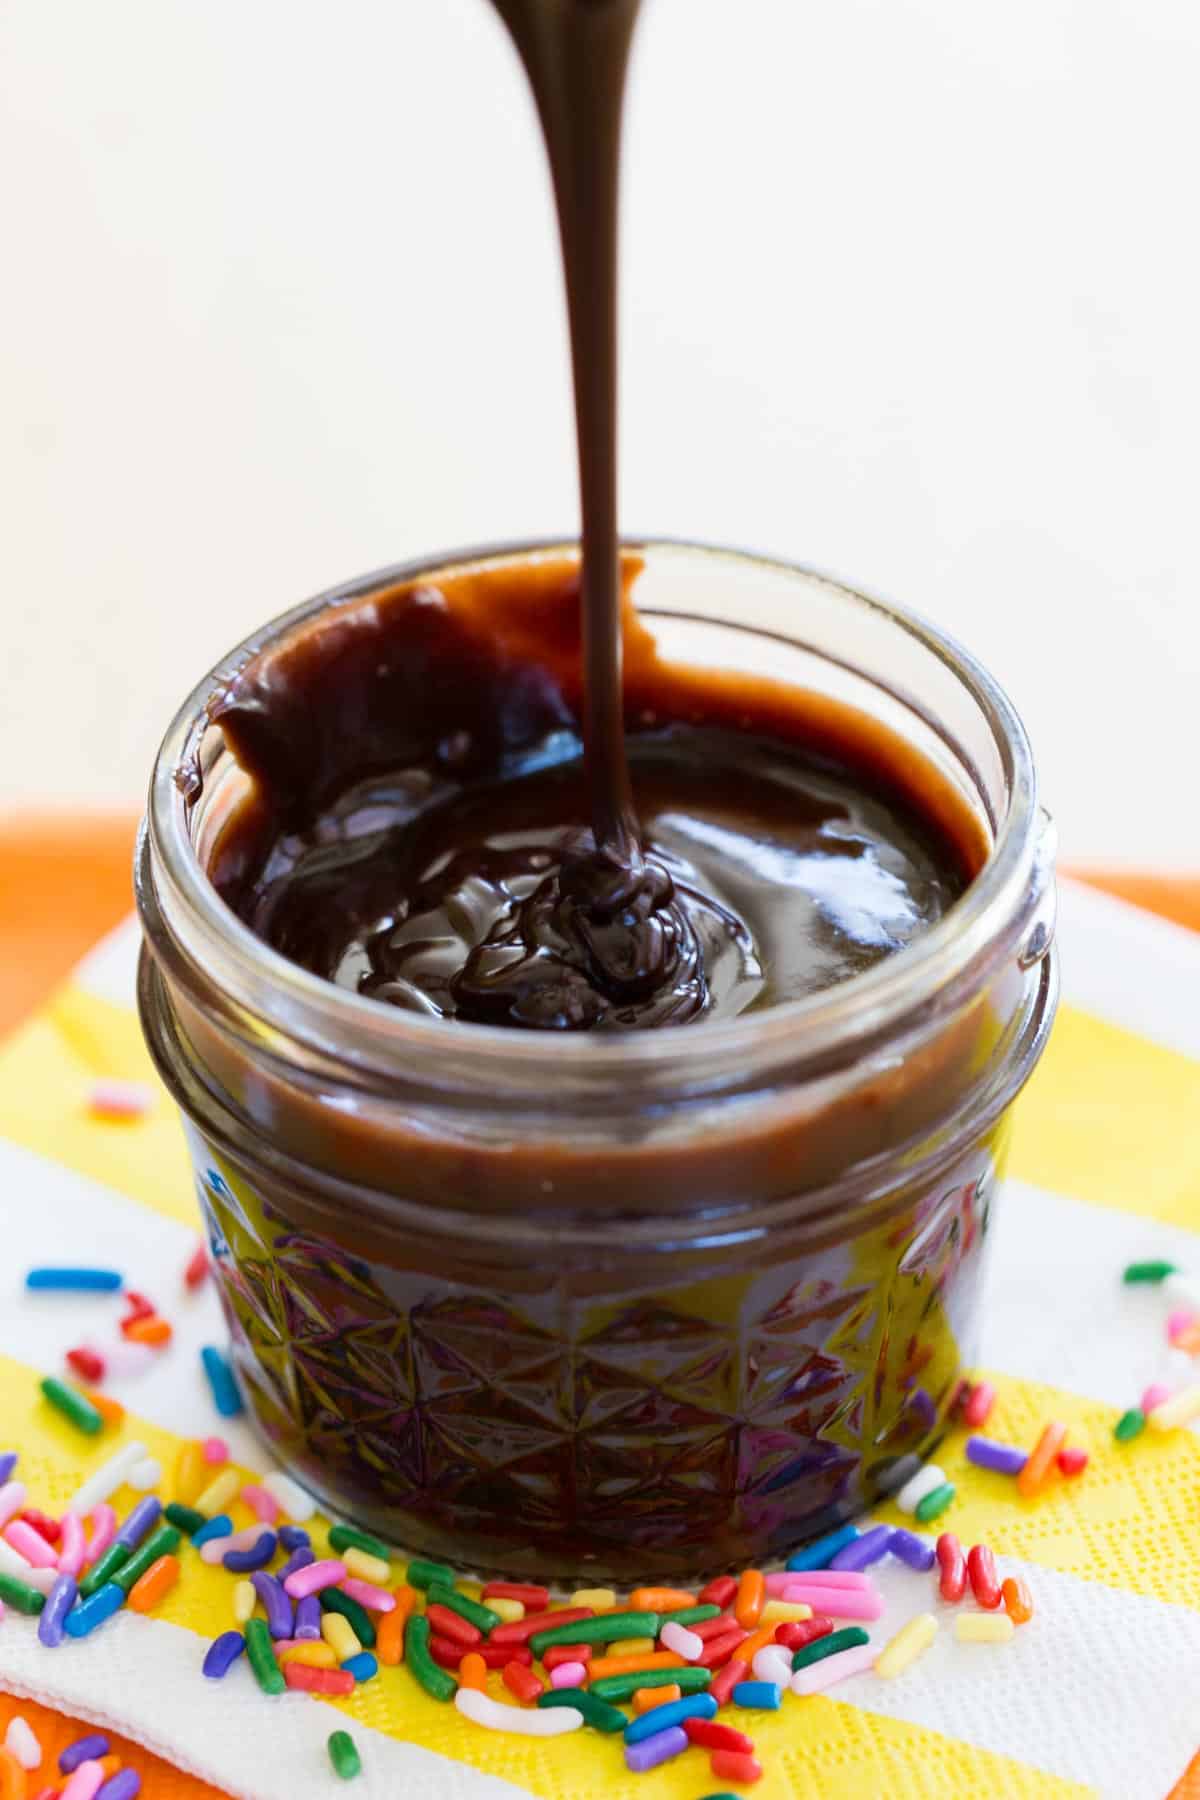 hot fudge sauce dripping into a small jar on a yellow and white striped napkin surrounded by rainbow sprinkles